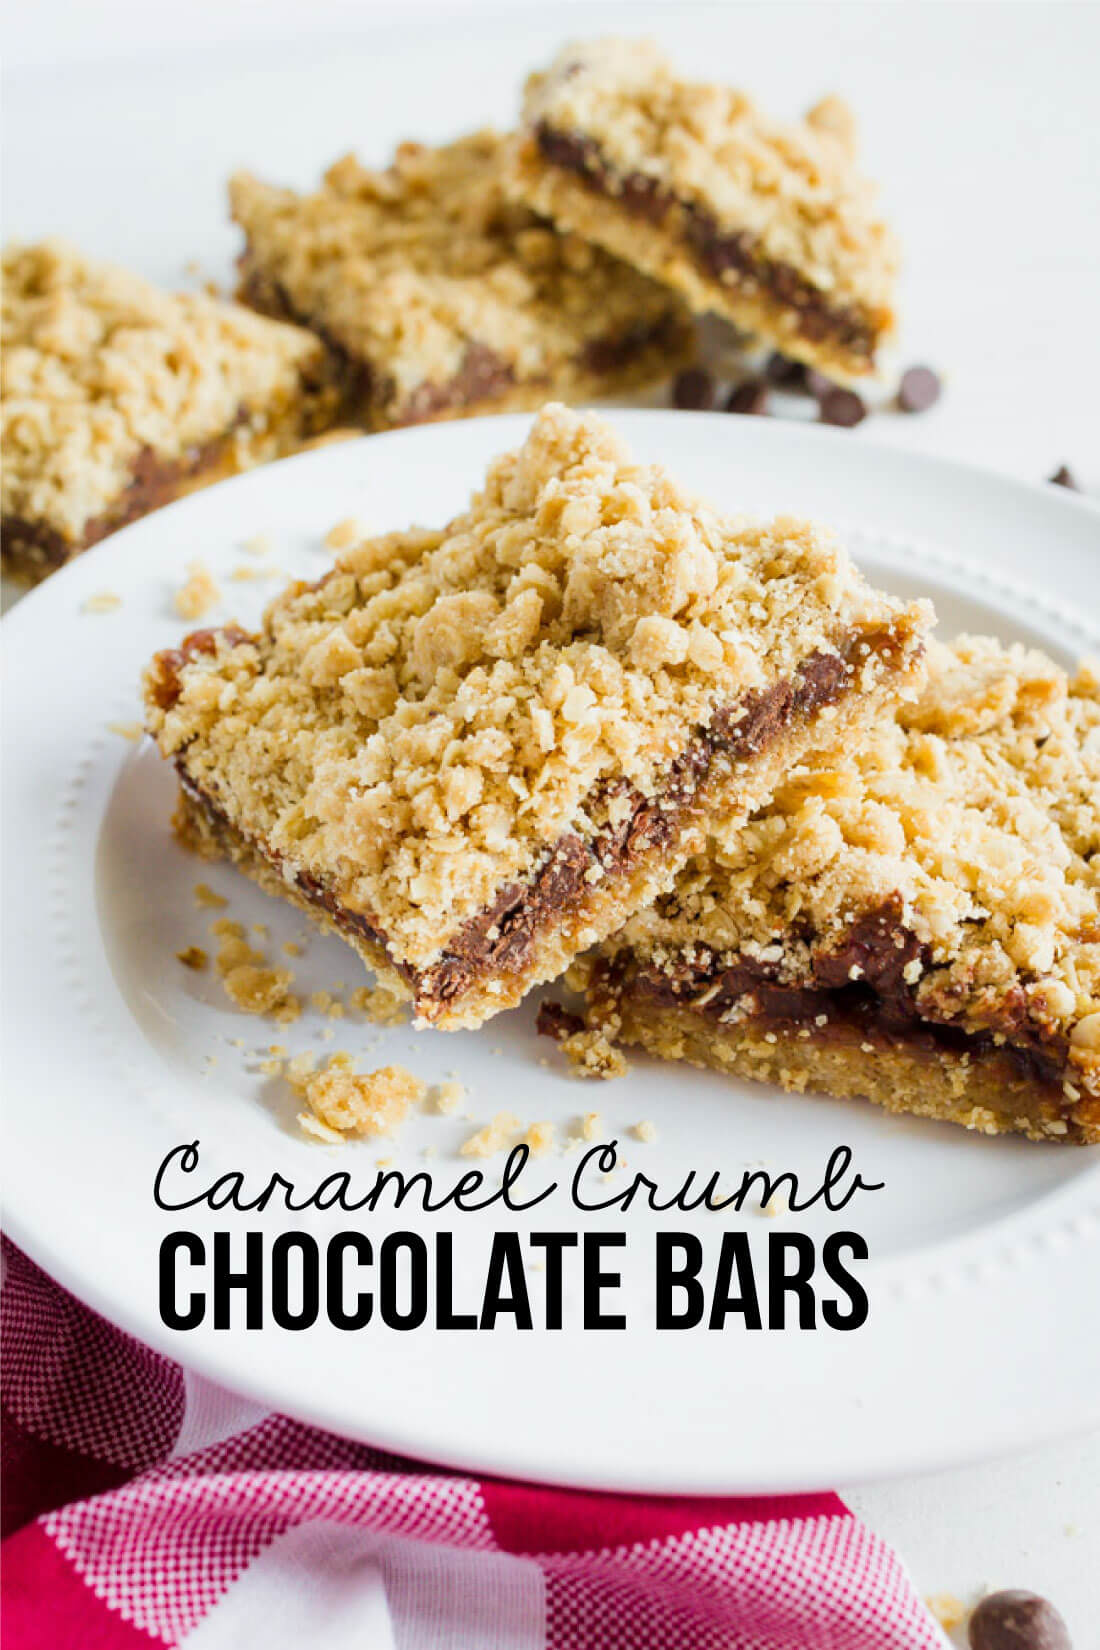 Caramel Crumb Chocolate Bars - make this easy dessert for a sweet treat!